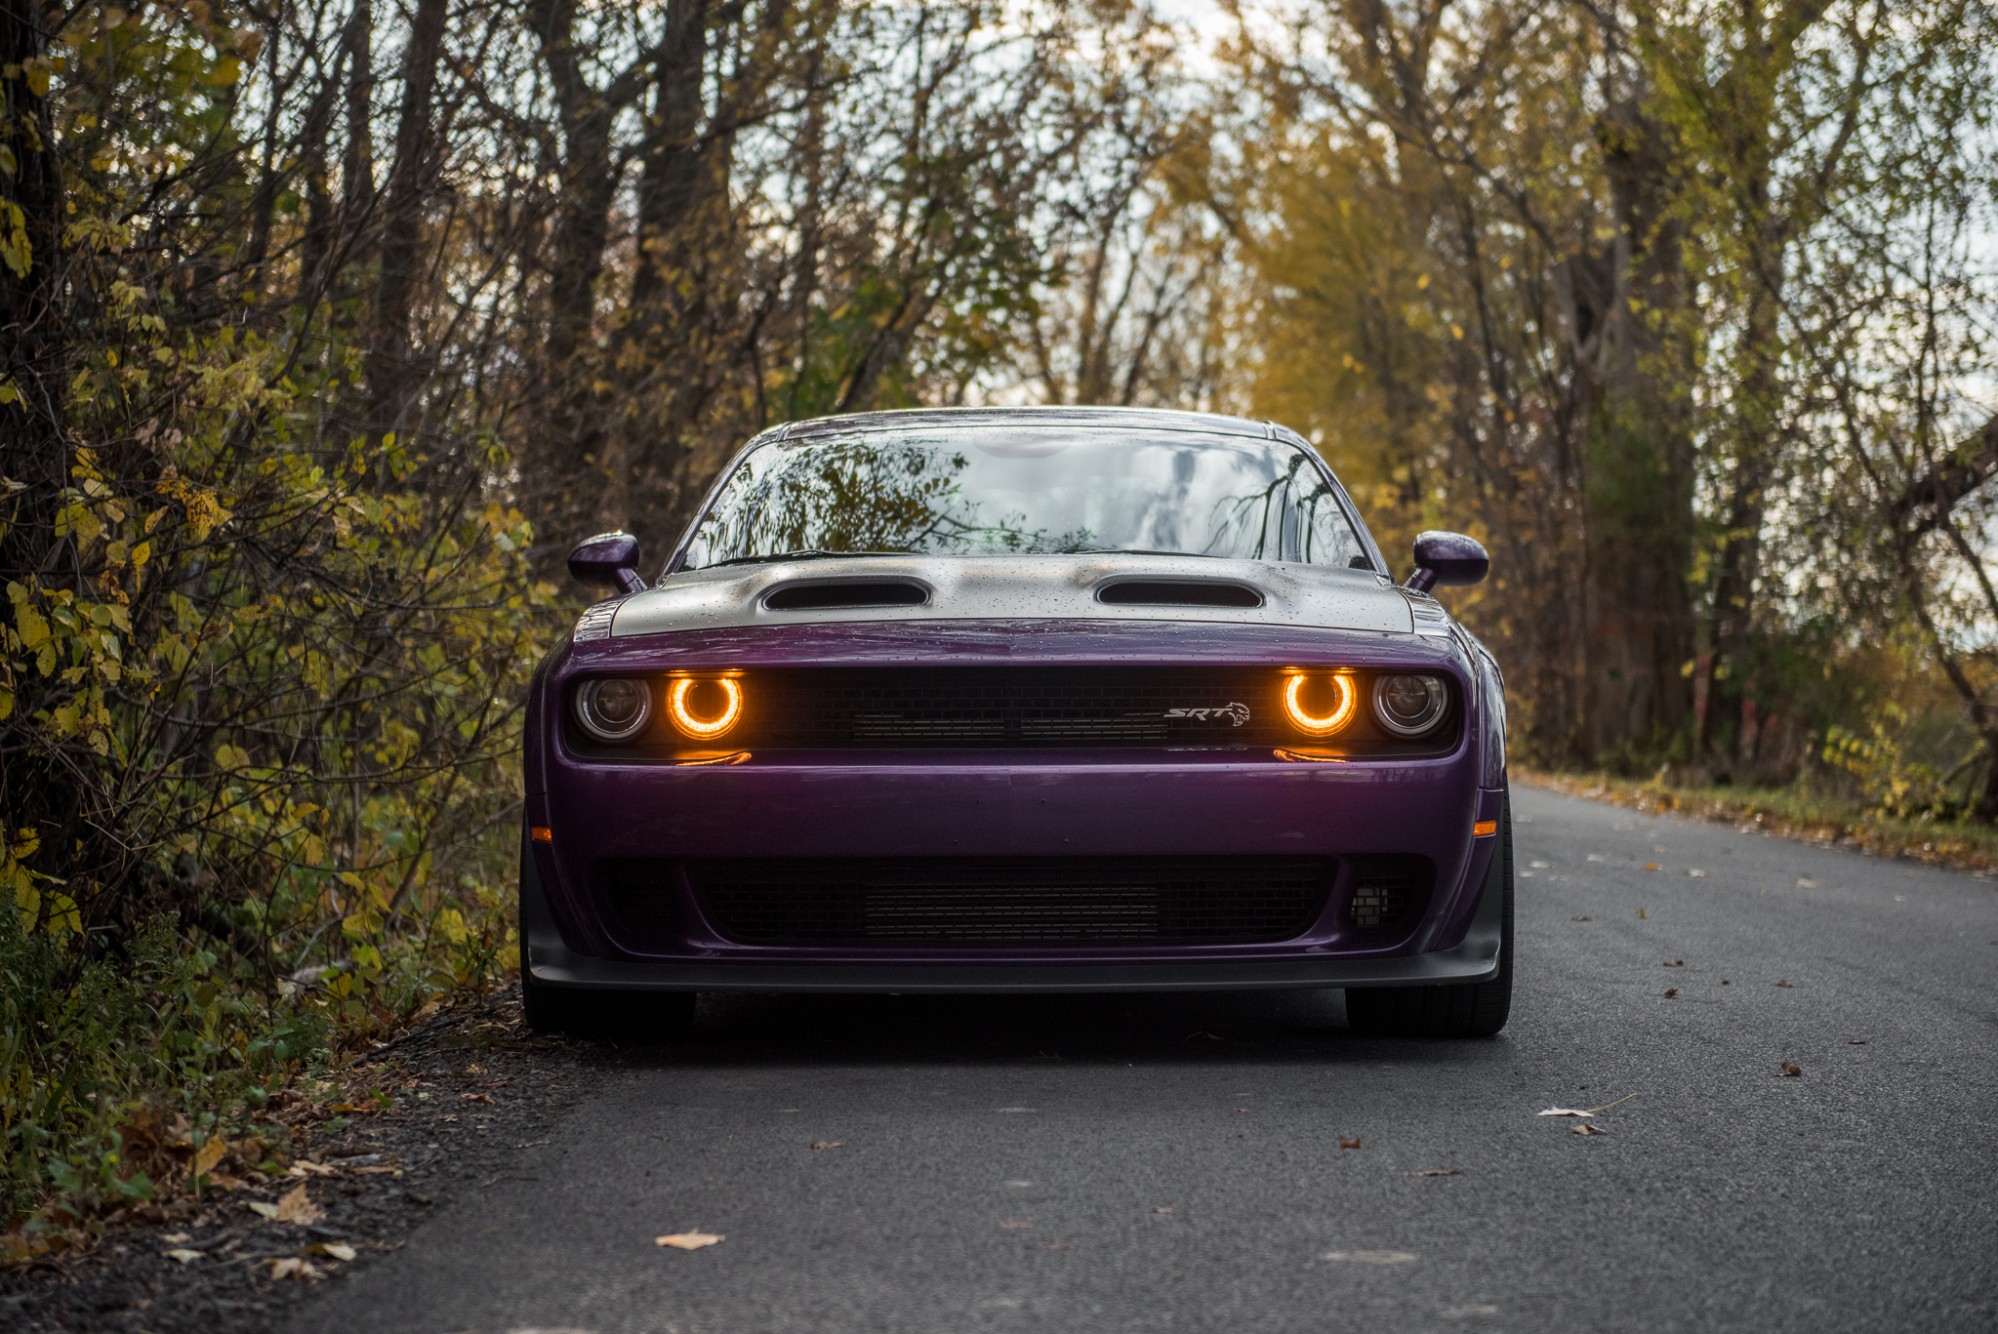 2019 Dodge Challenger Hellcat Redeye Widebody Just Doesn't Give A Shit